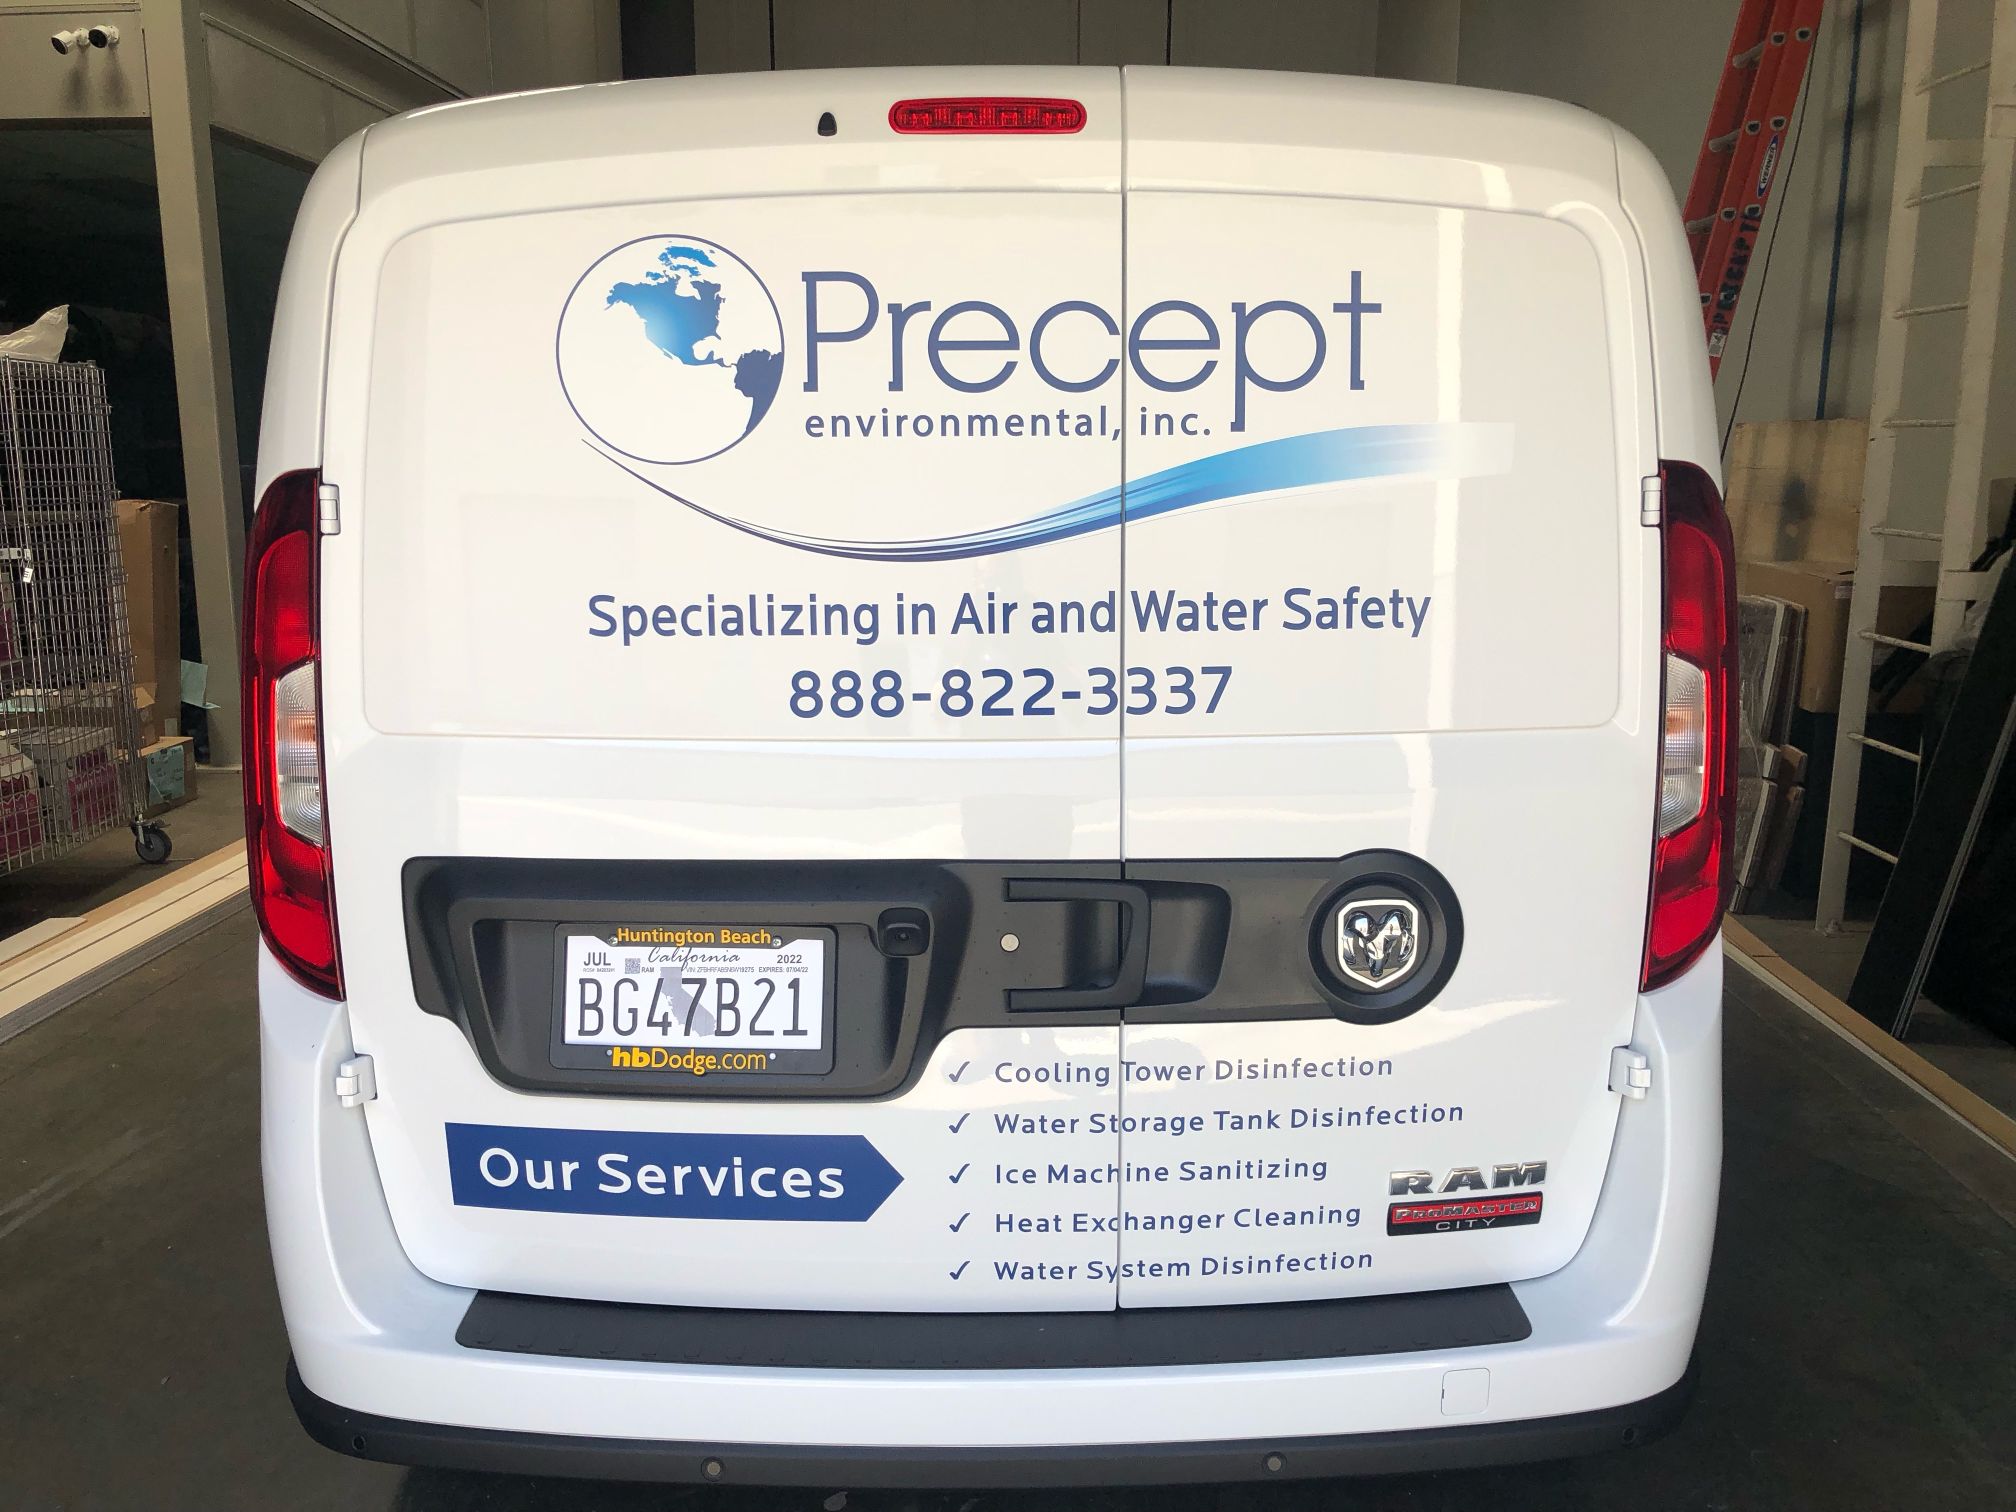 Orange County CA Environmental Firm Brands Their Commercial City Van with Vinyl Graphics